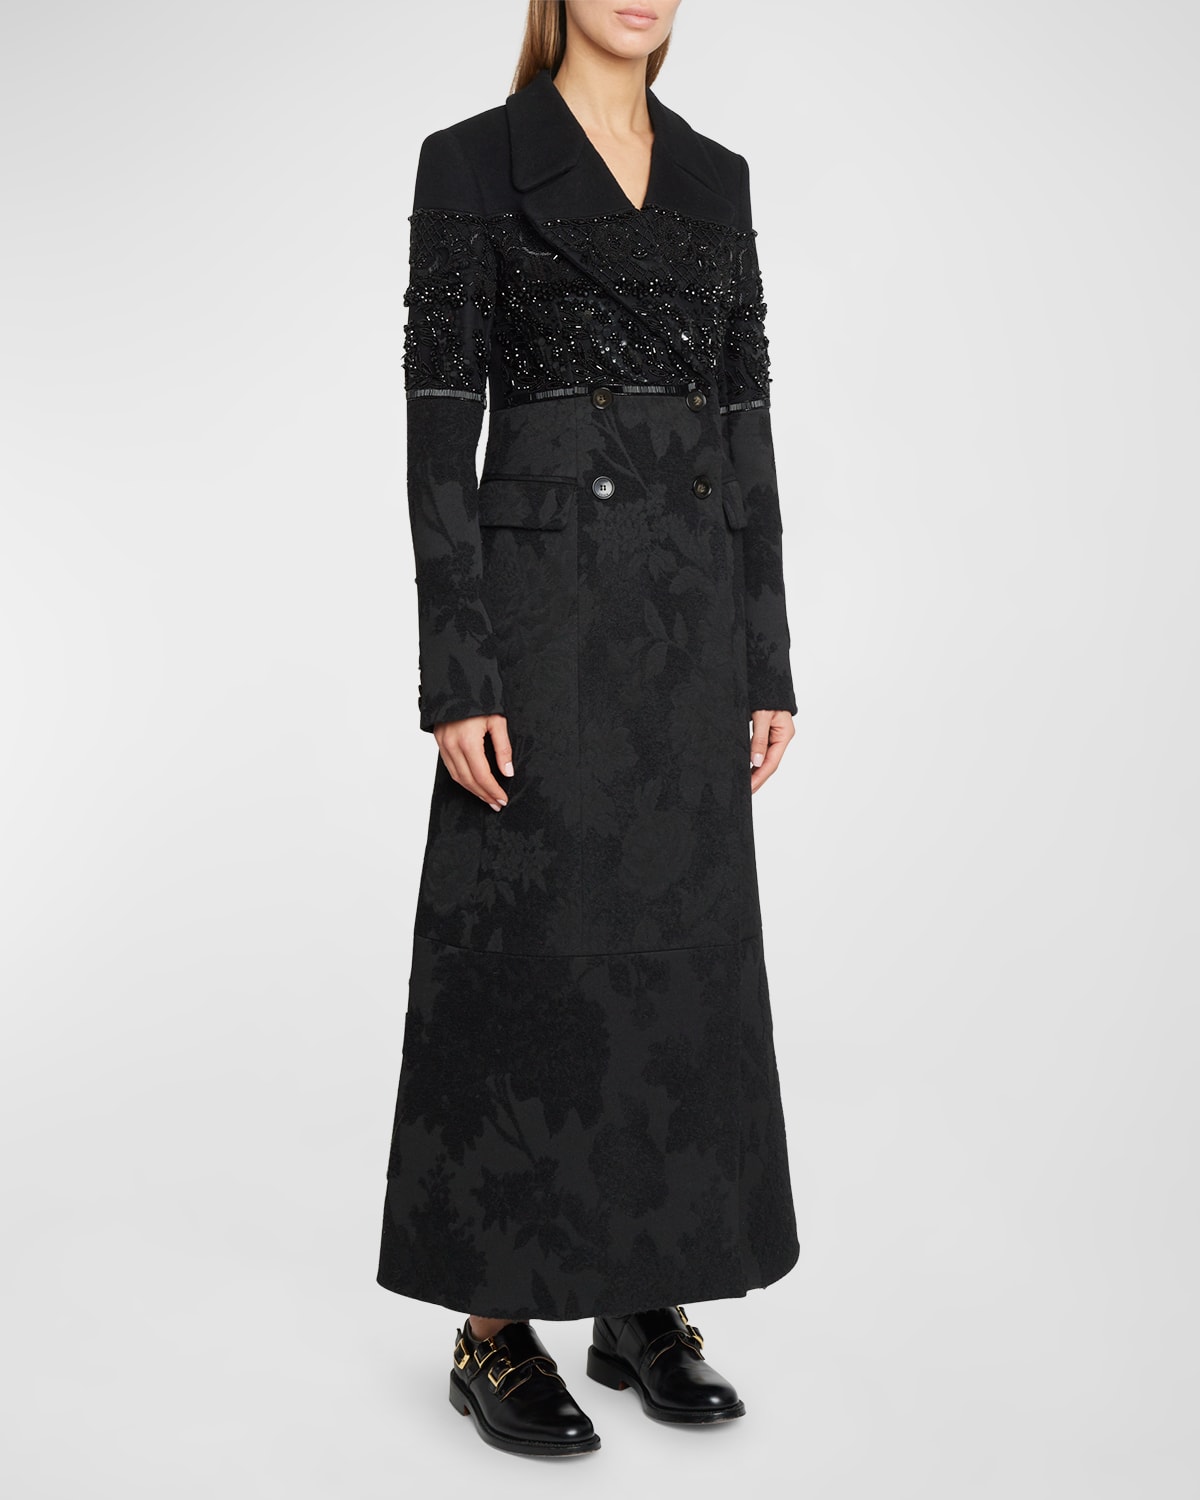 Floral Jacquard Embellished Long Double-Breasted Coat